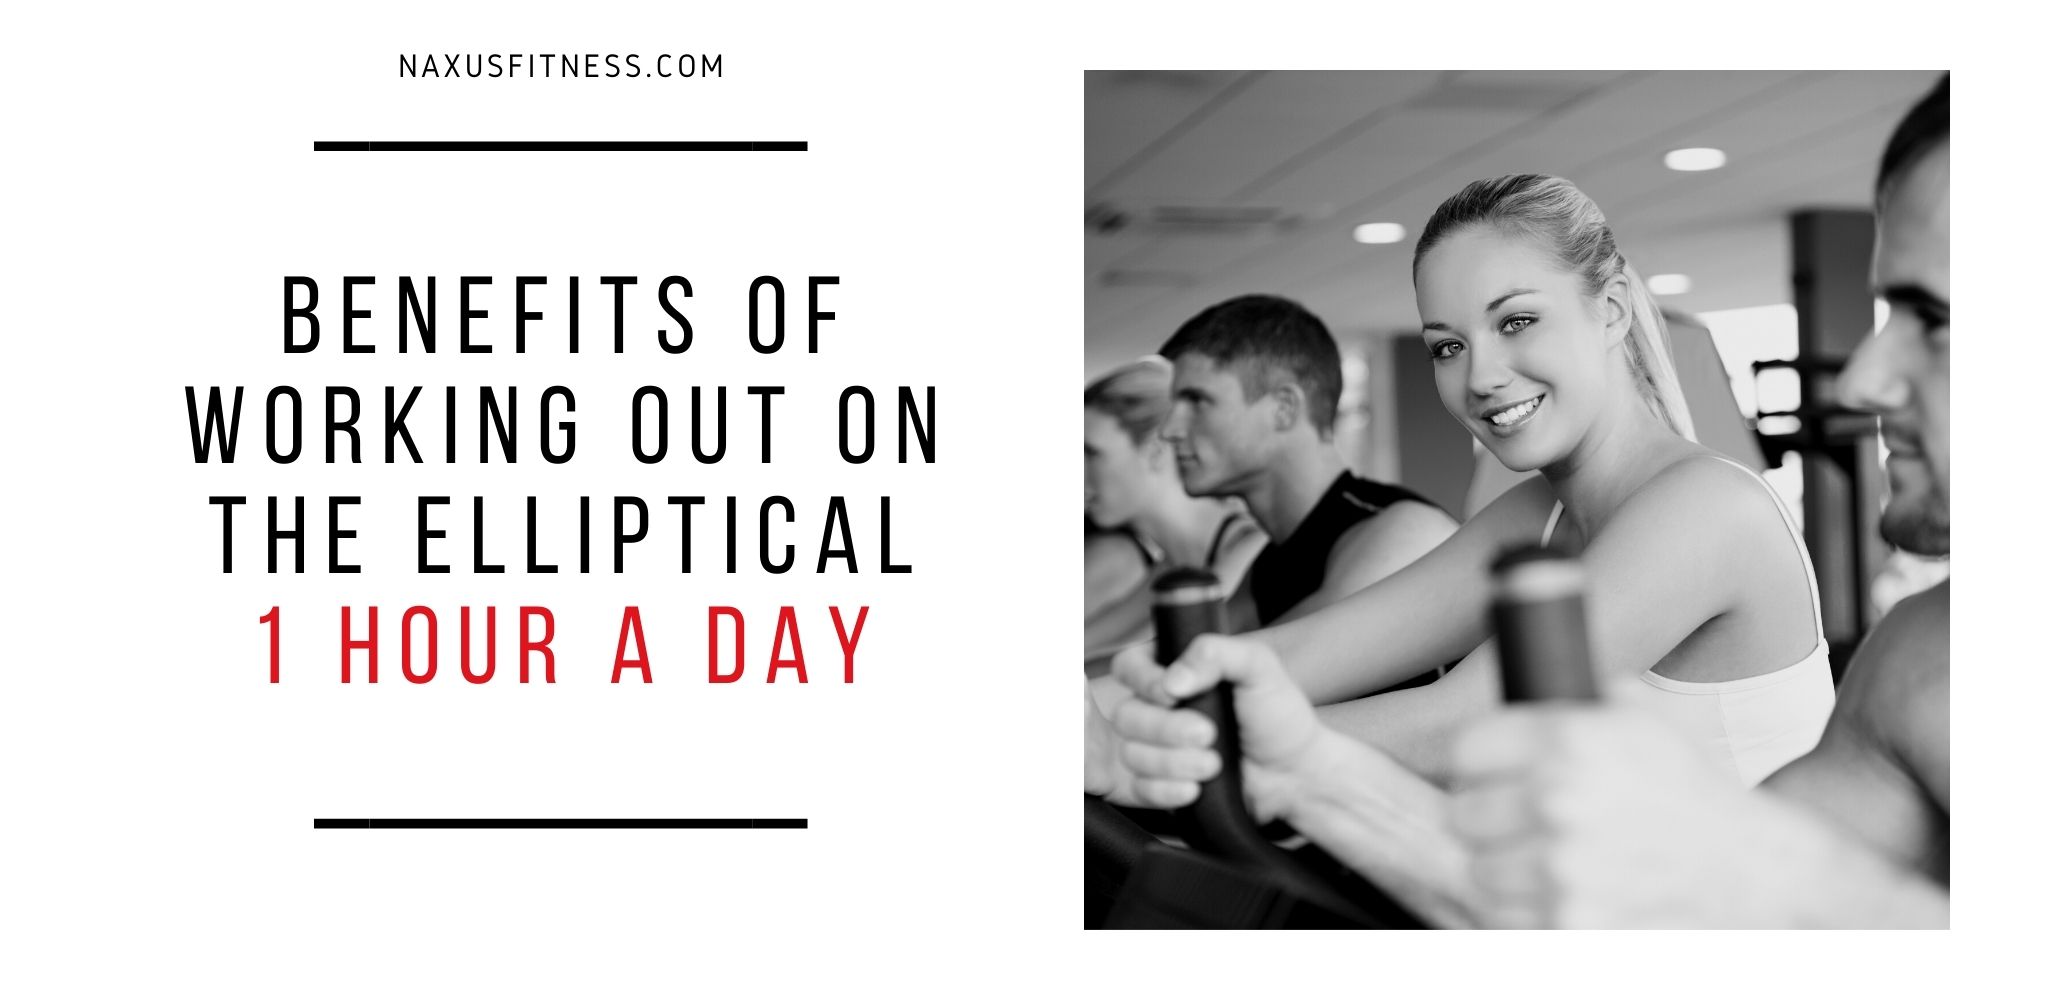 Benefits of 1 hour a day elliptical workouts